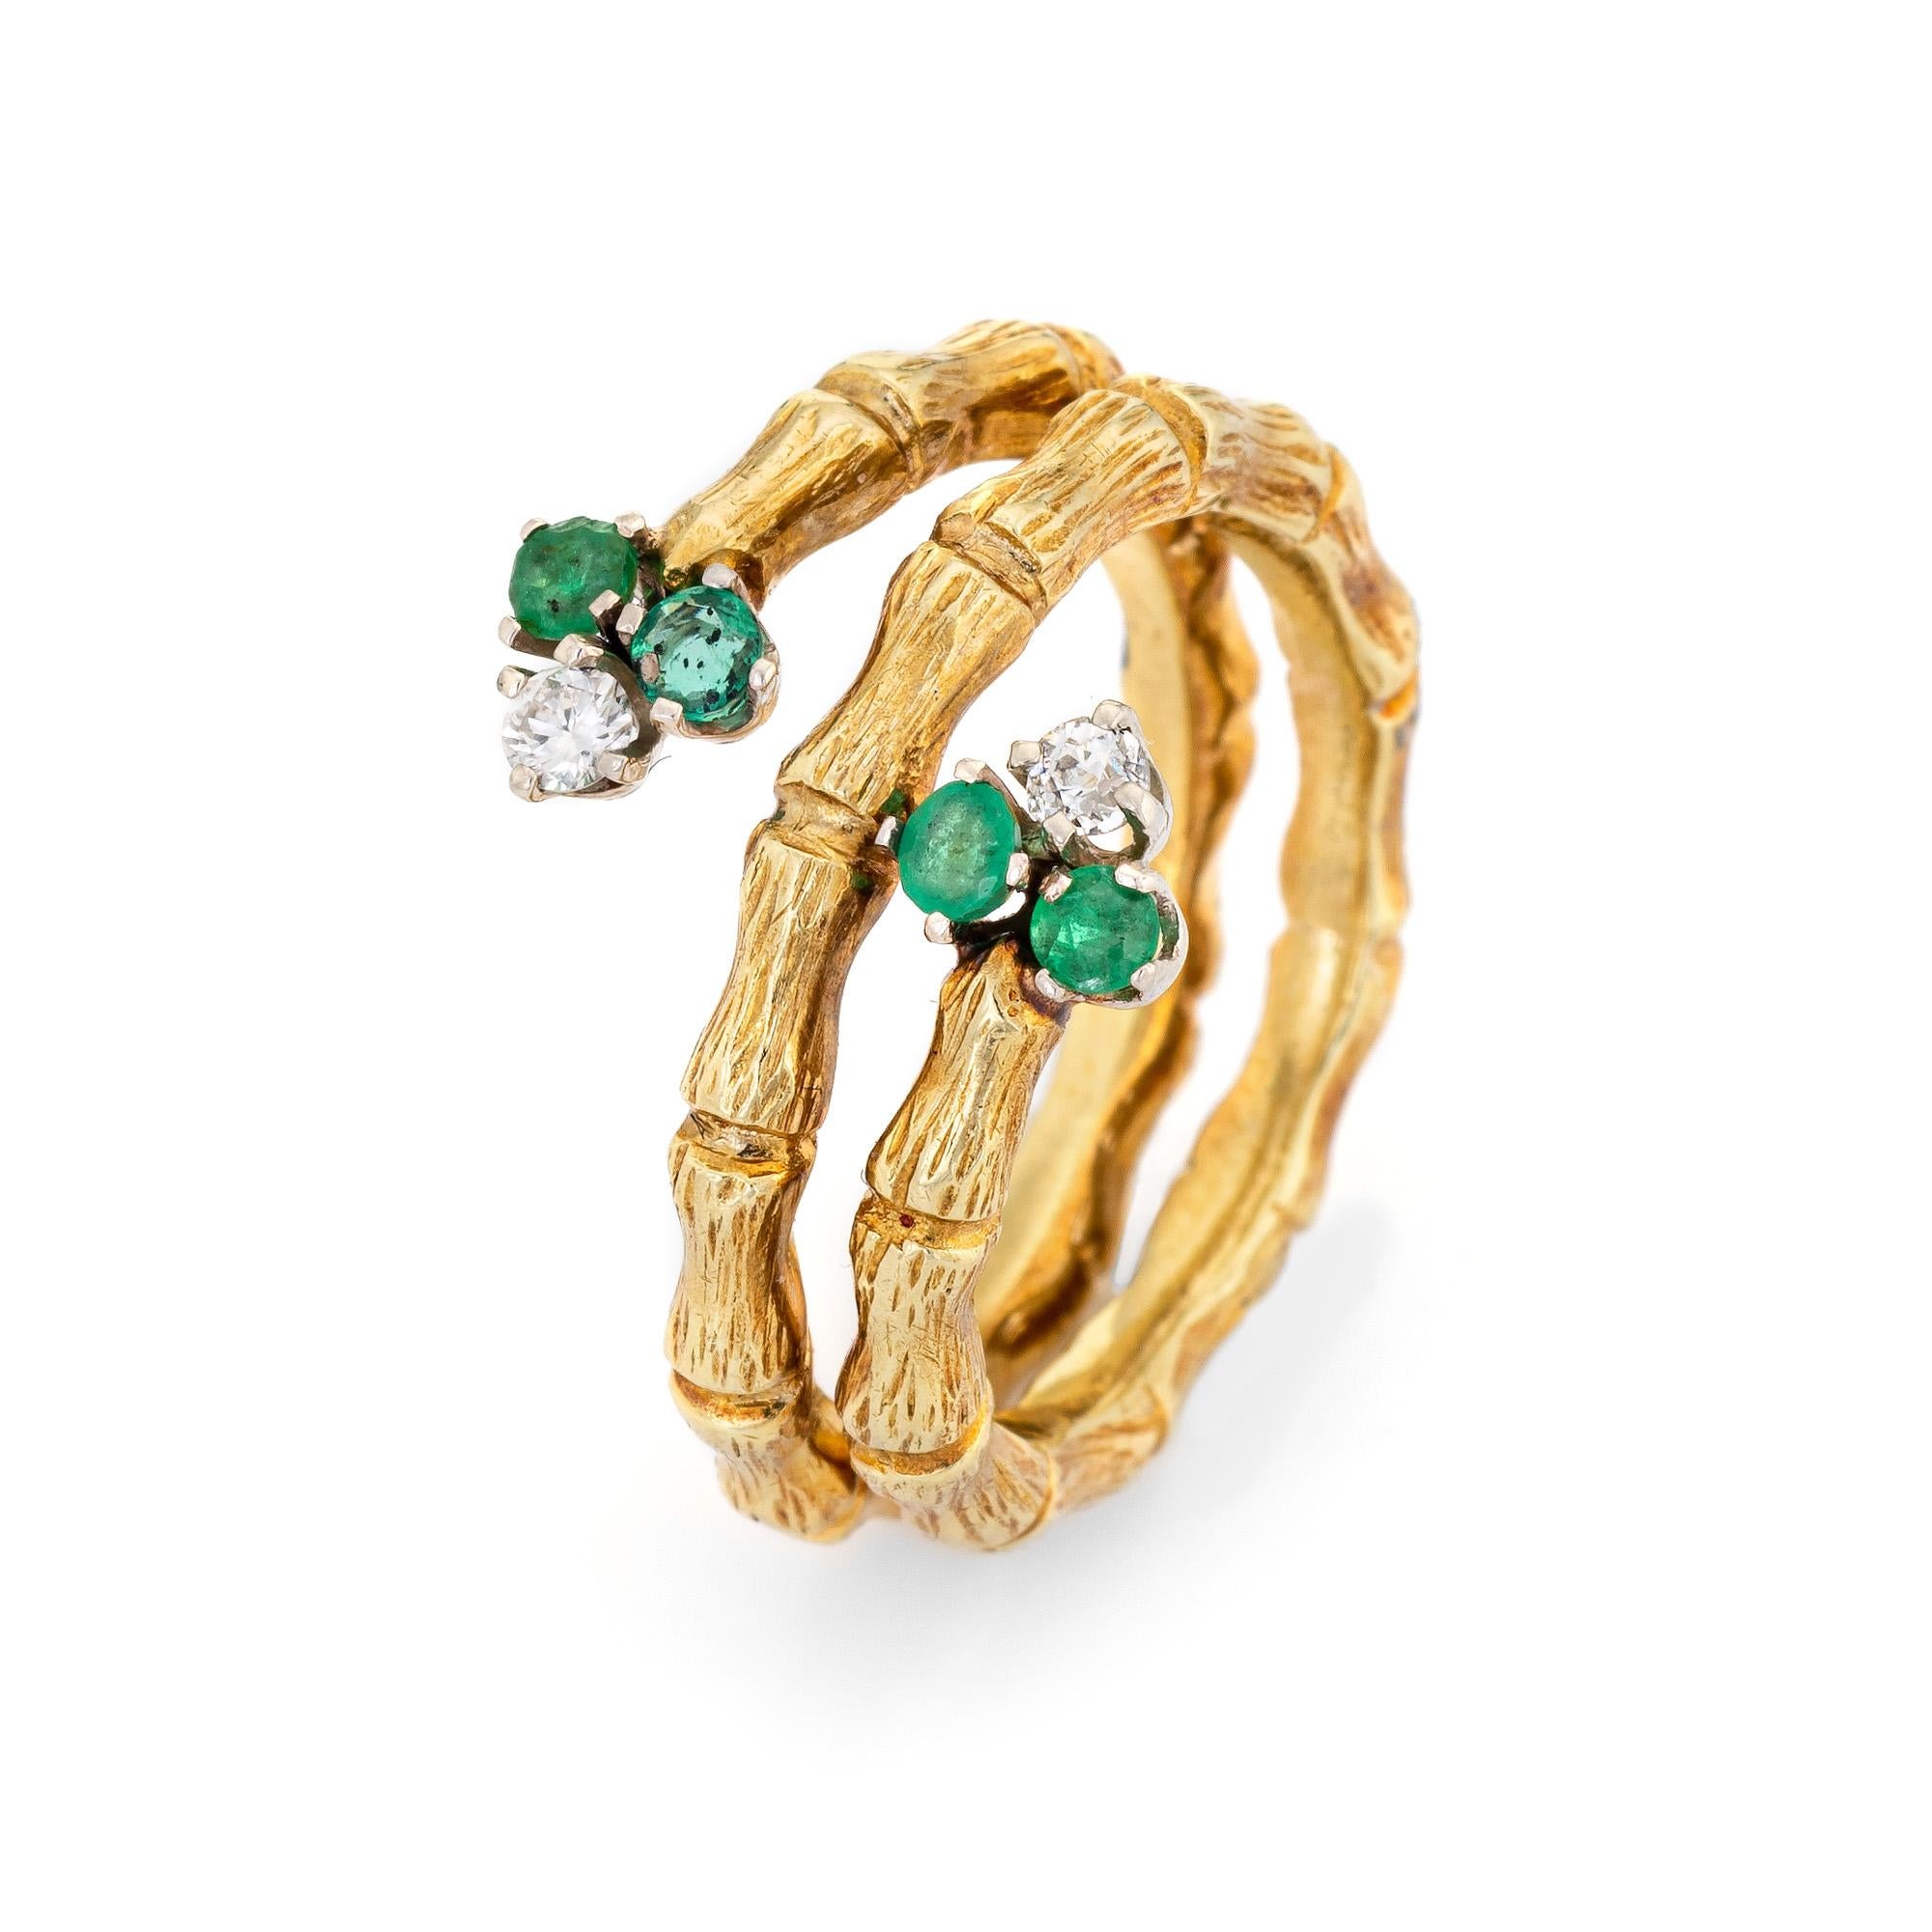 Stylish vintage emerald & diamond bamboo ring (circa 1970s) crafted in 18 karat yellow gold. 

Four estimated 0.04 carat emeralds (0.16 carats total estimated weight) and two estimated 0.05 carat round brilliant cut diamonds. The diamonds total an